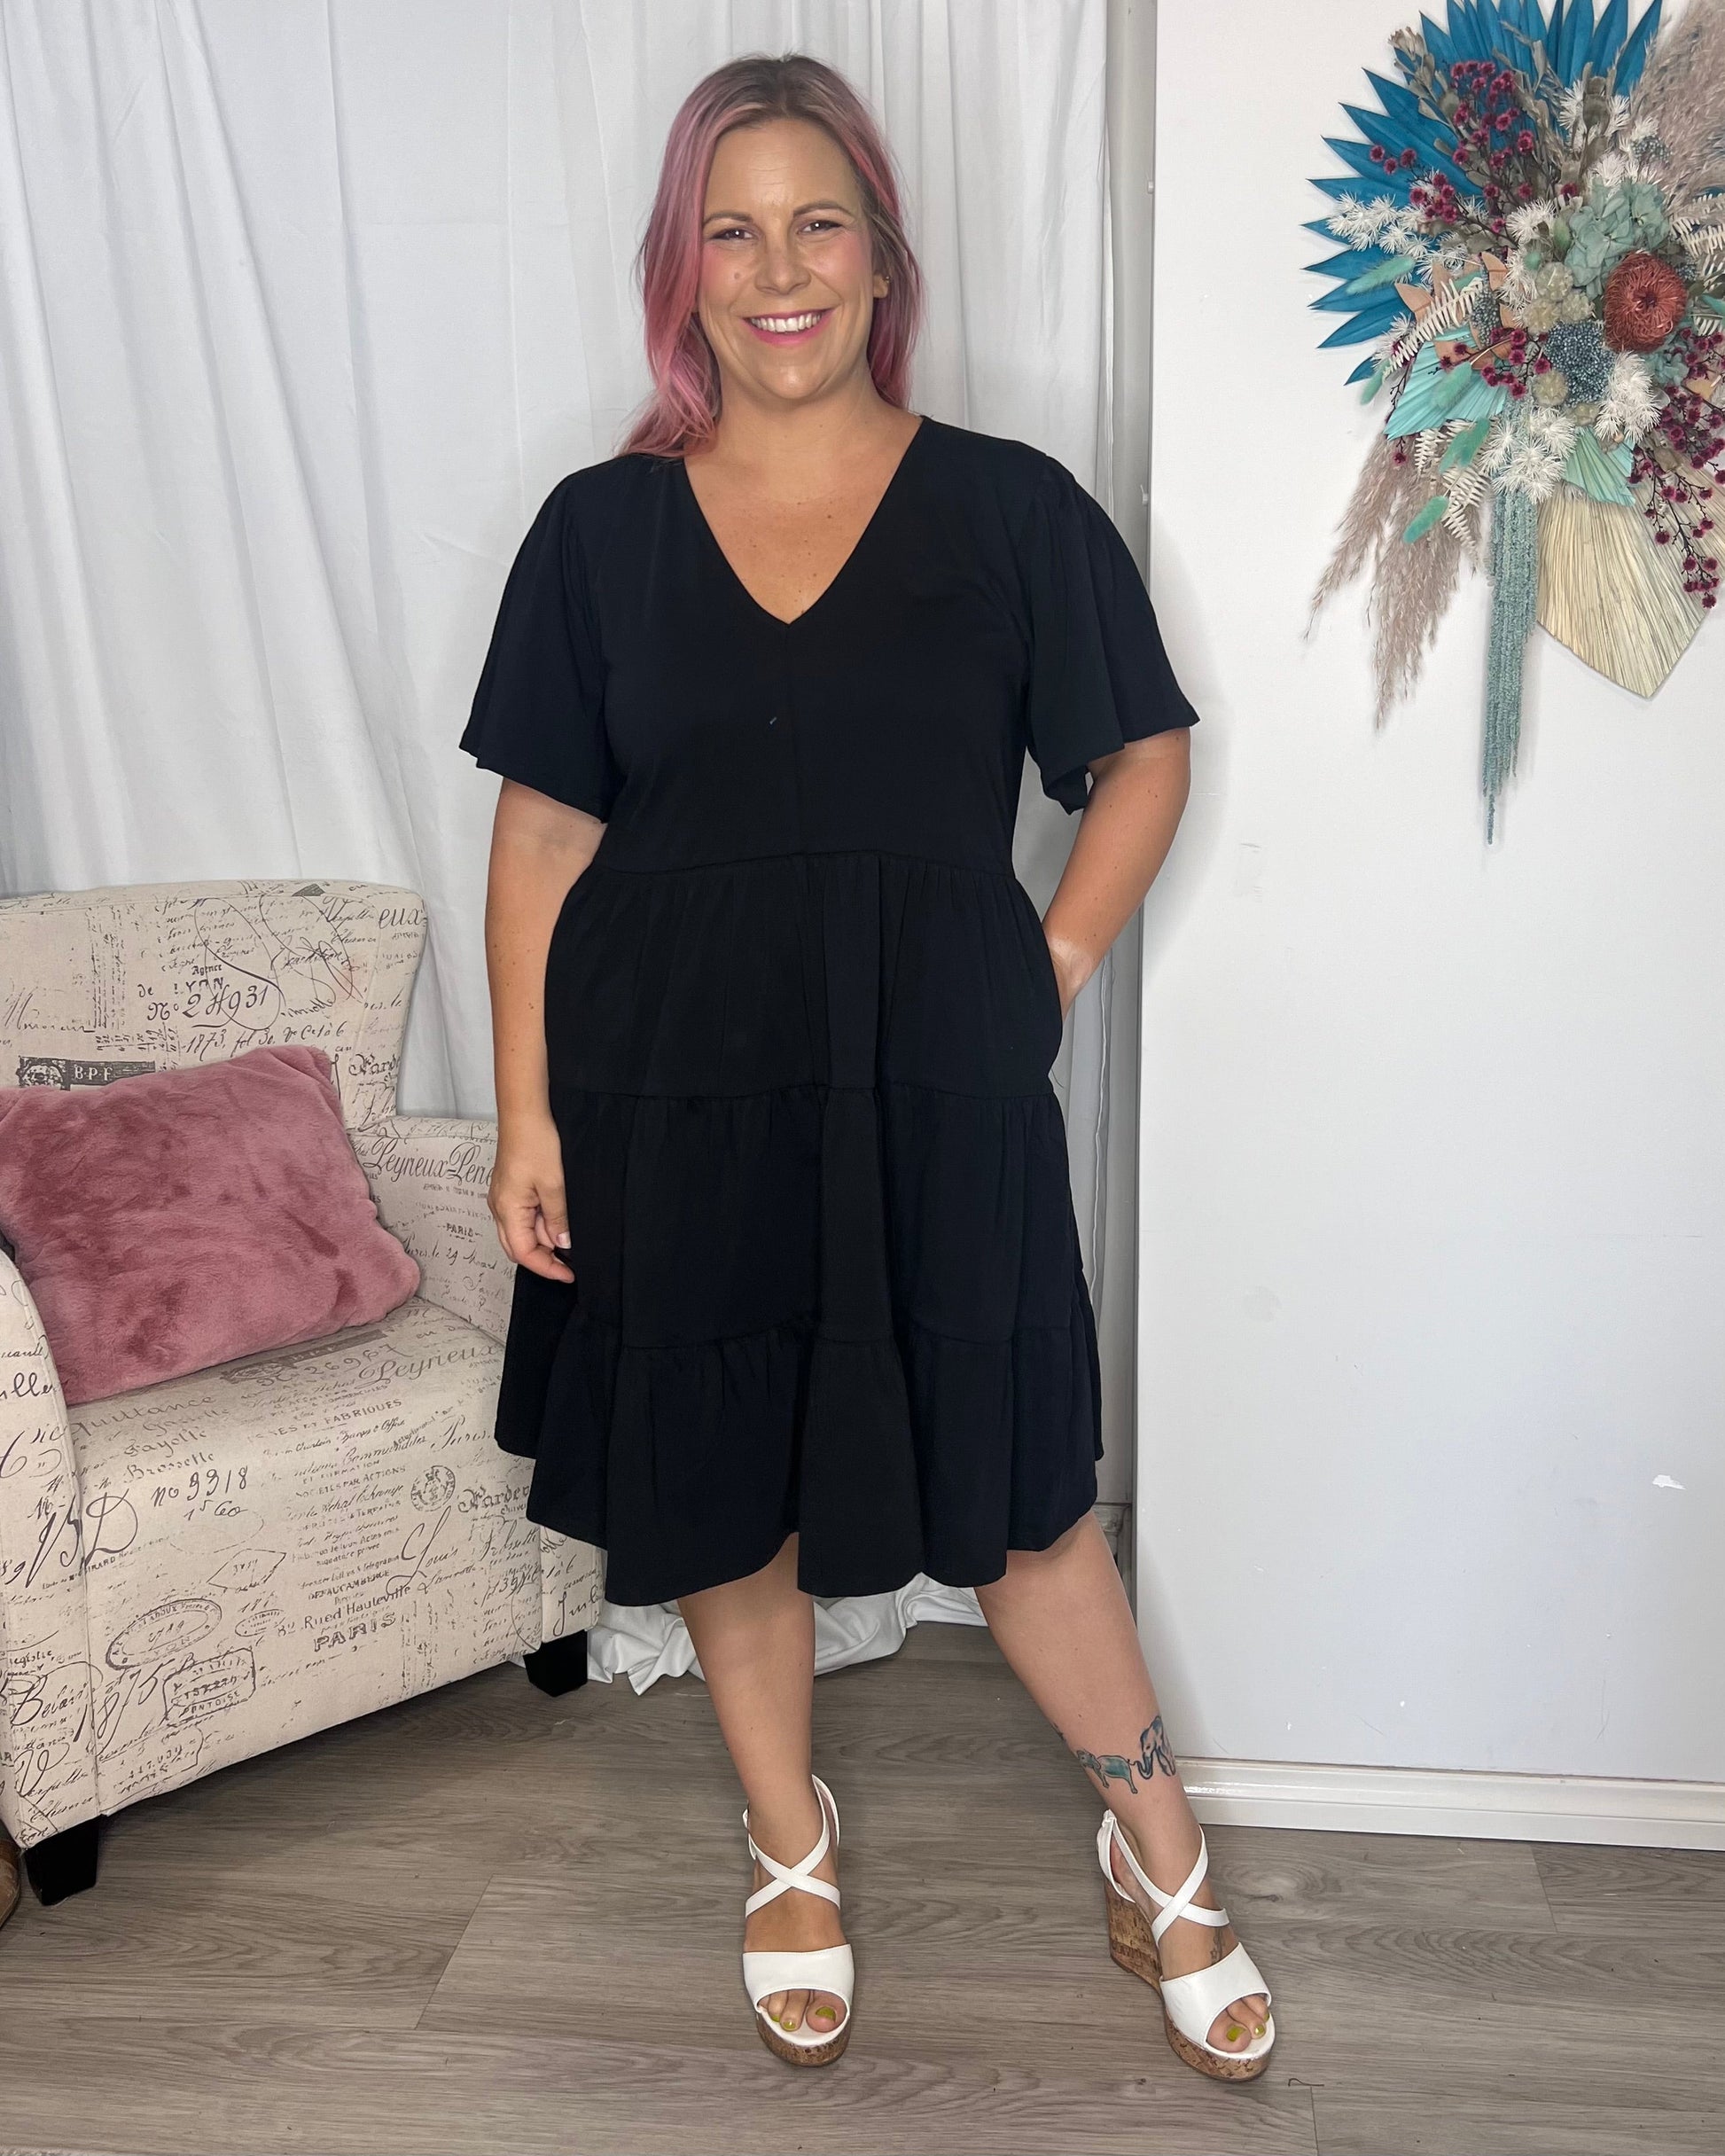 Cressida Dress - Black | Betty Basics | Introducing the Cressida Dress your carefree chic essential! With a V-neck, flutter sleeves, a relaxed tiered body, and pockets for added flair, this dress effortles